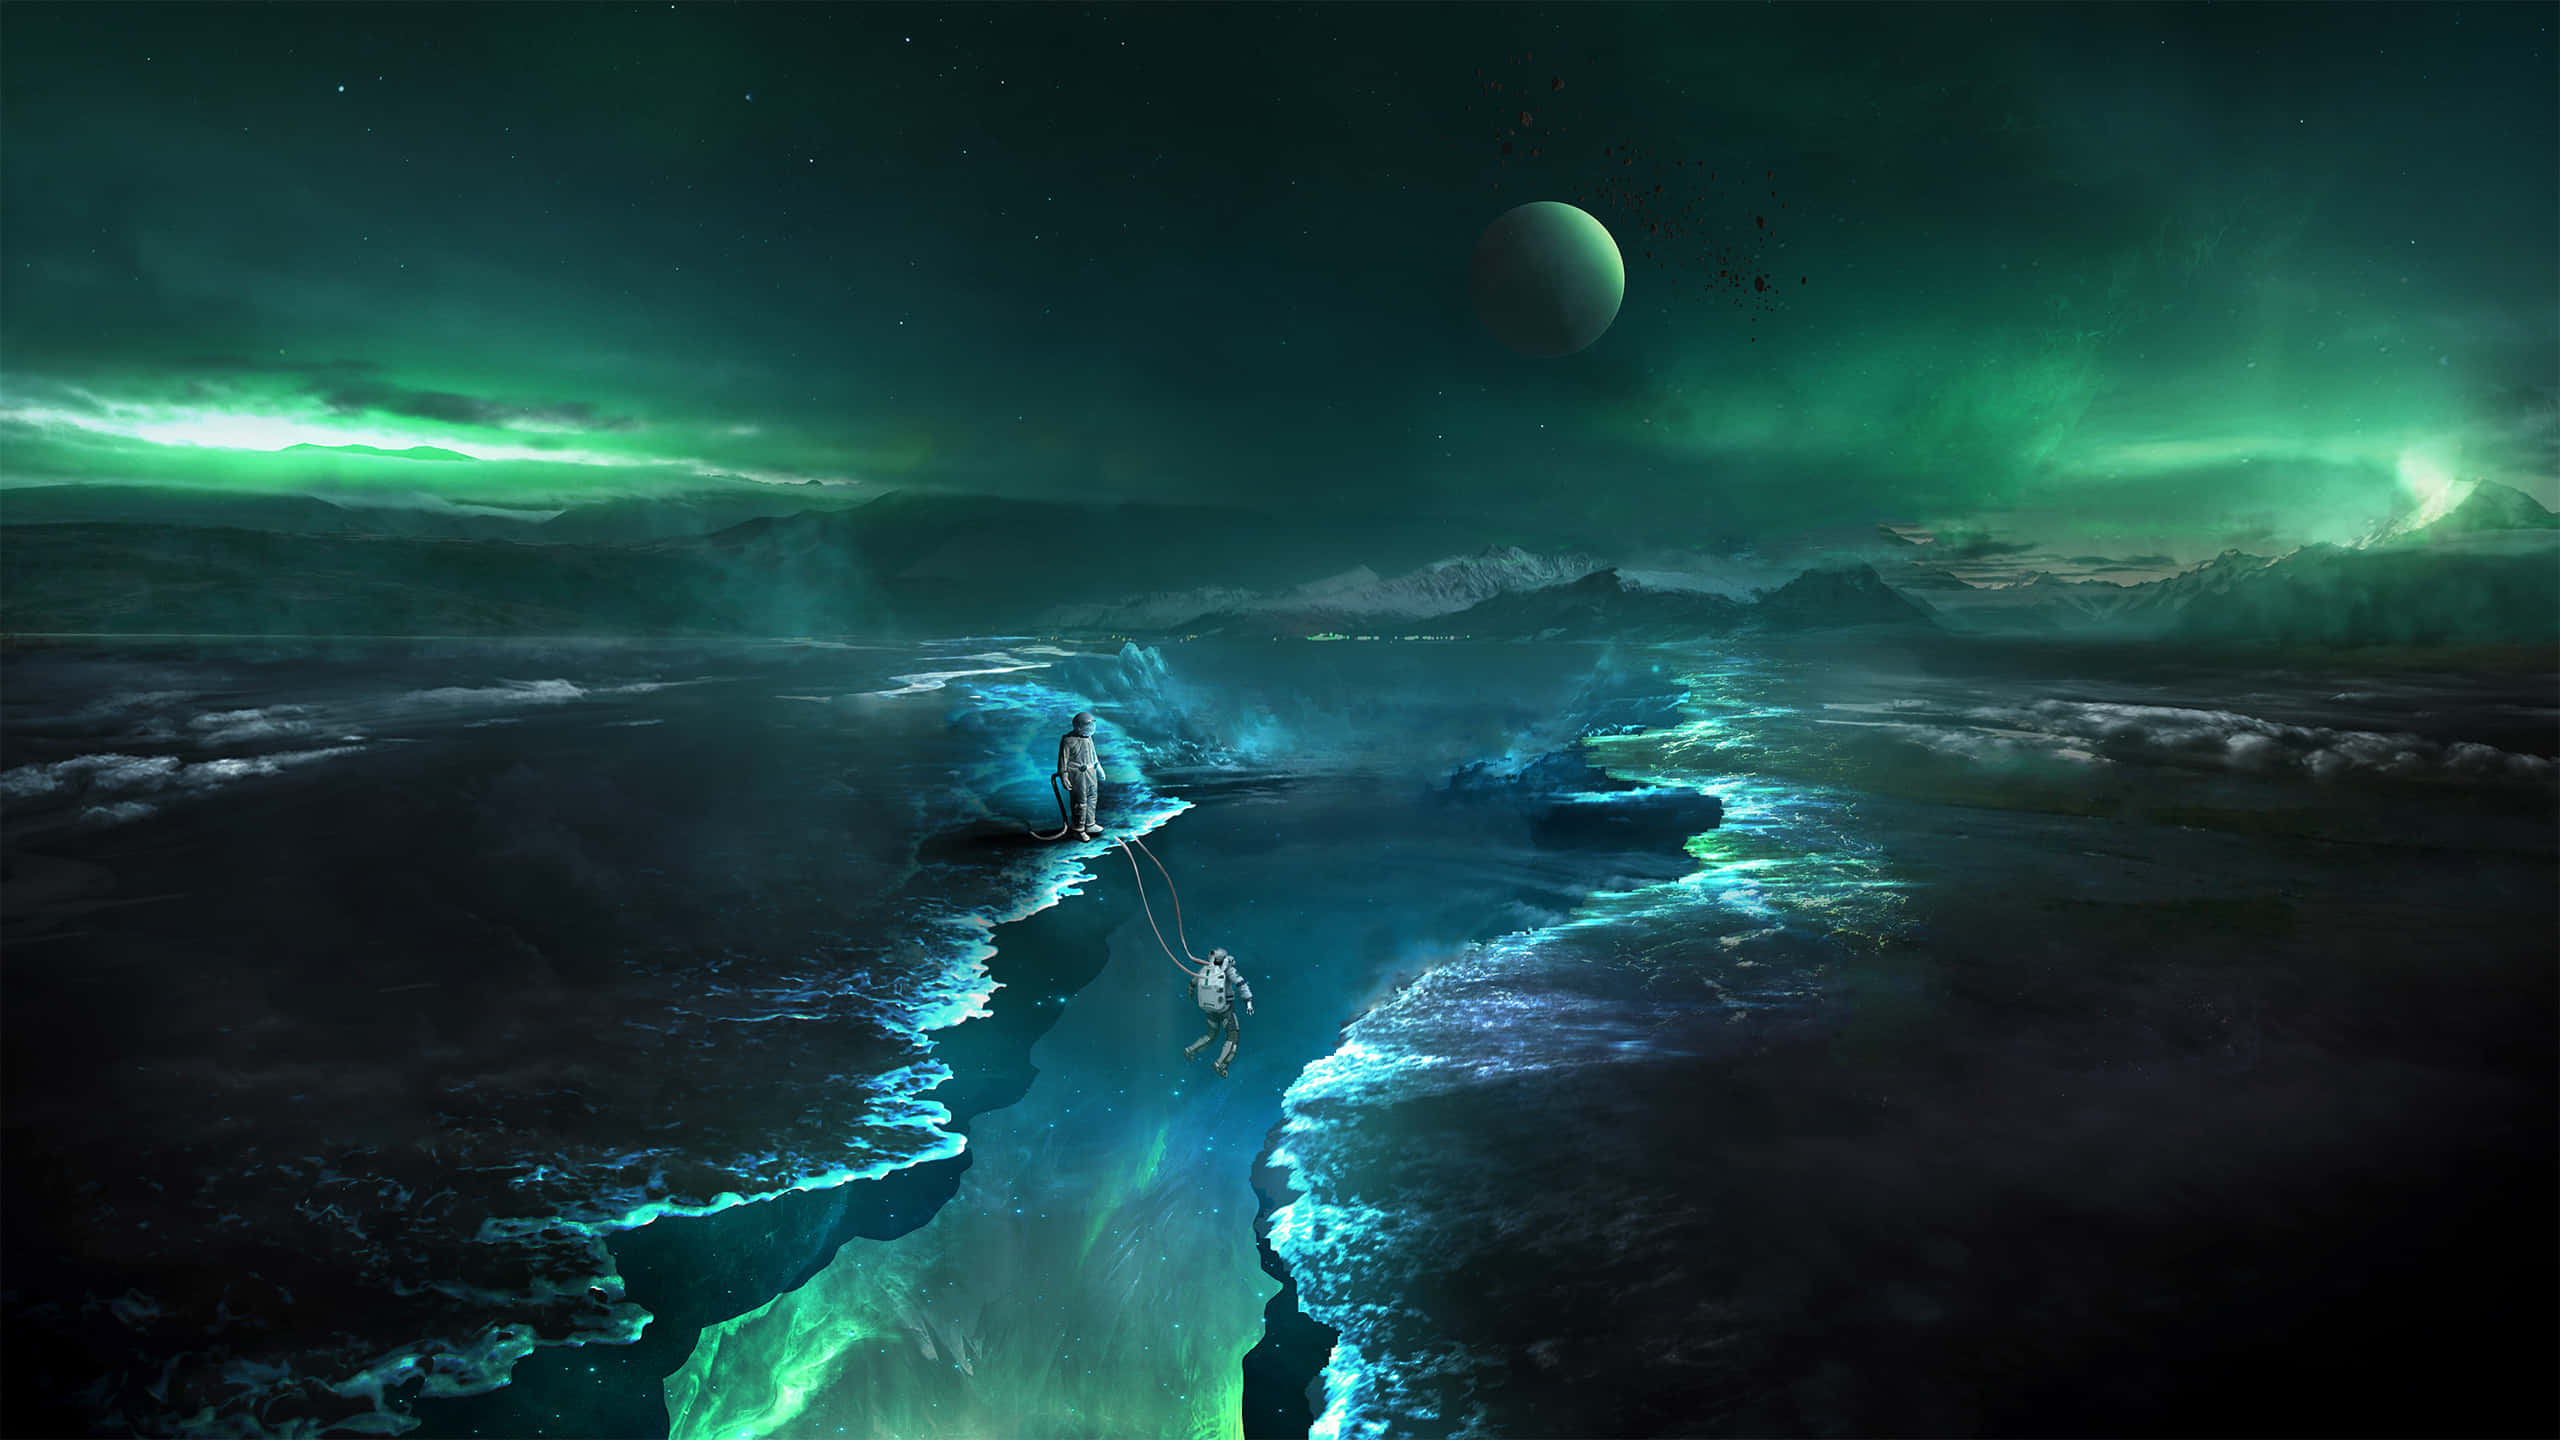 Welcome to the Fascinating World of Fantasy Space Wallpaper